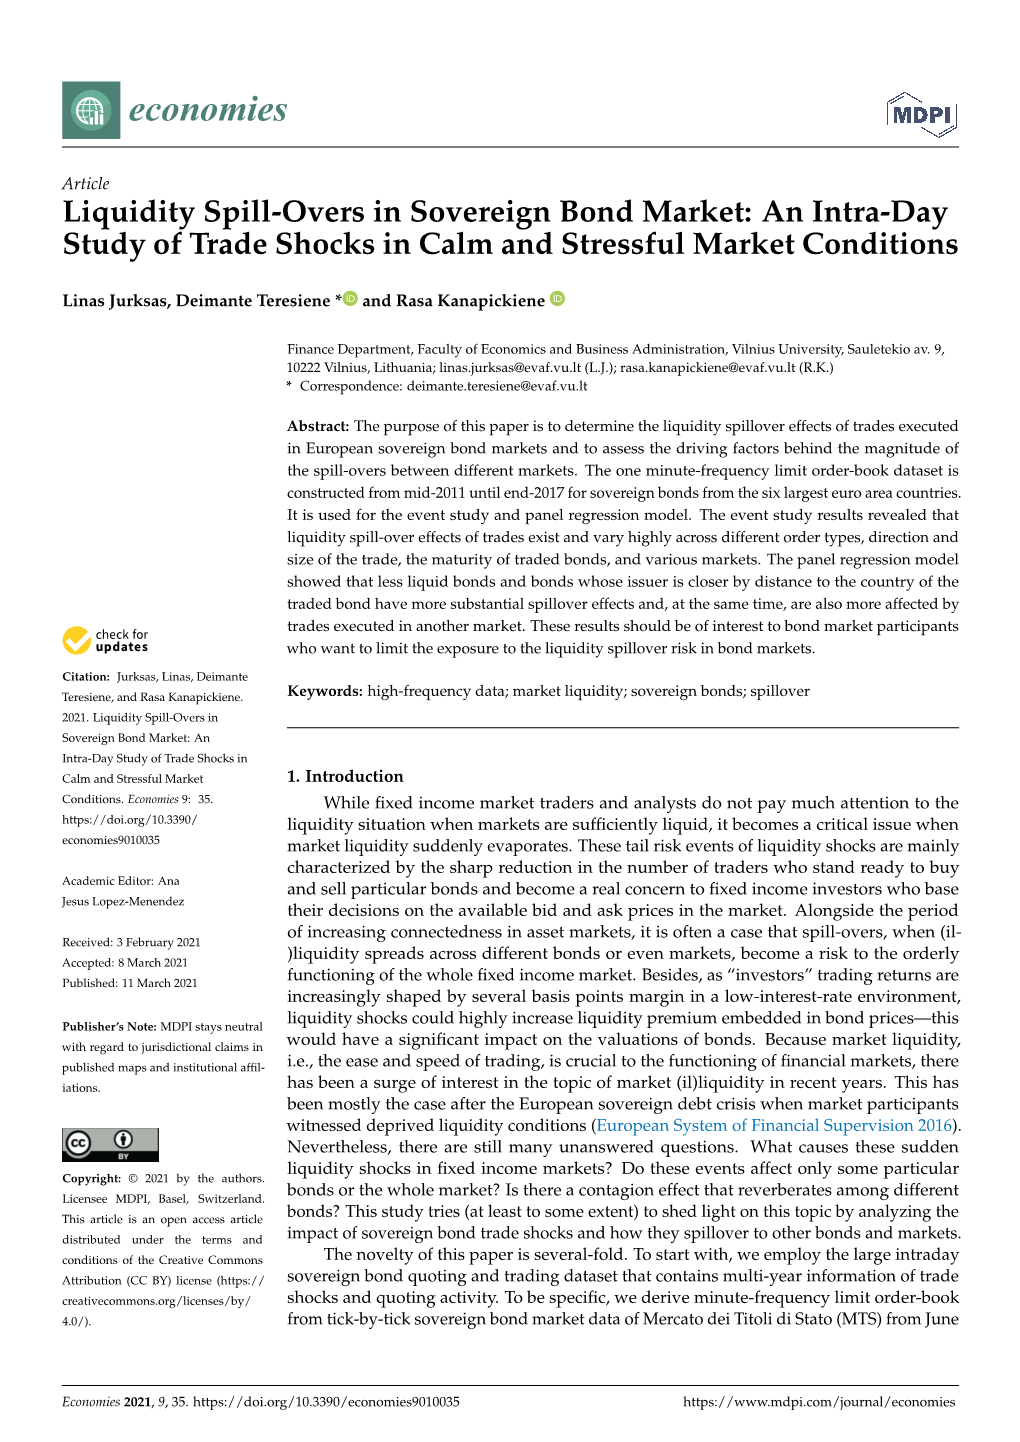 Liquidity Spill-Overs in Sovereign Bond Market: an Intra-Day Study of Trade Shocks in Calm and Stressful Market Conditions